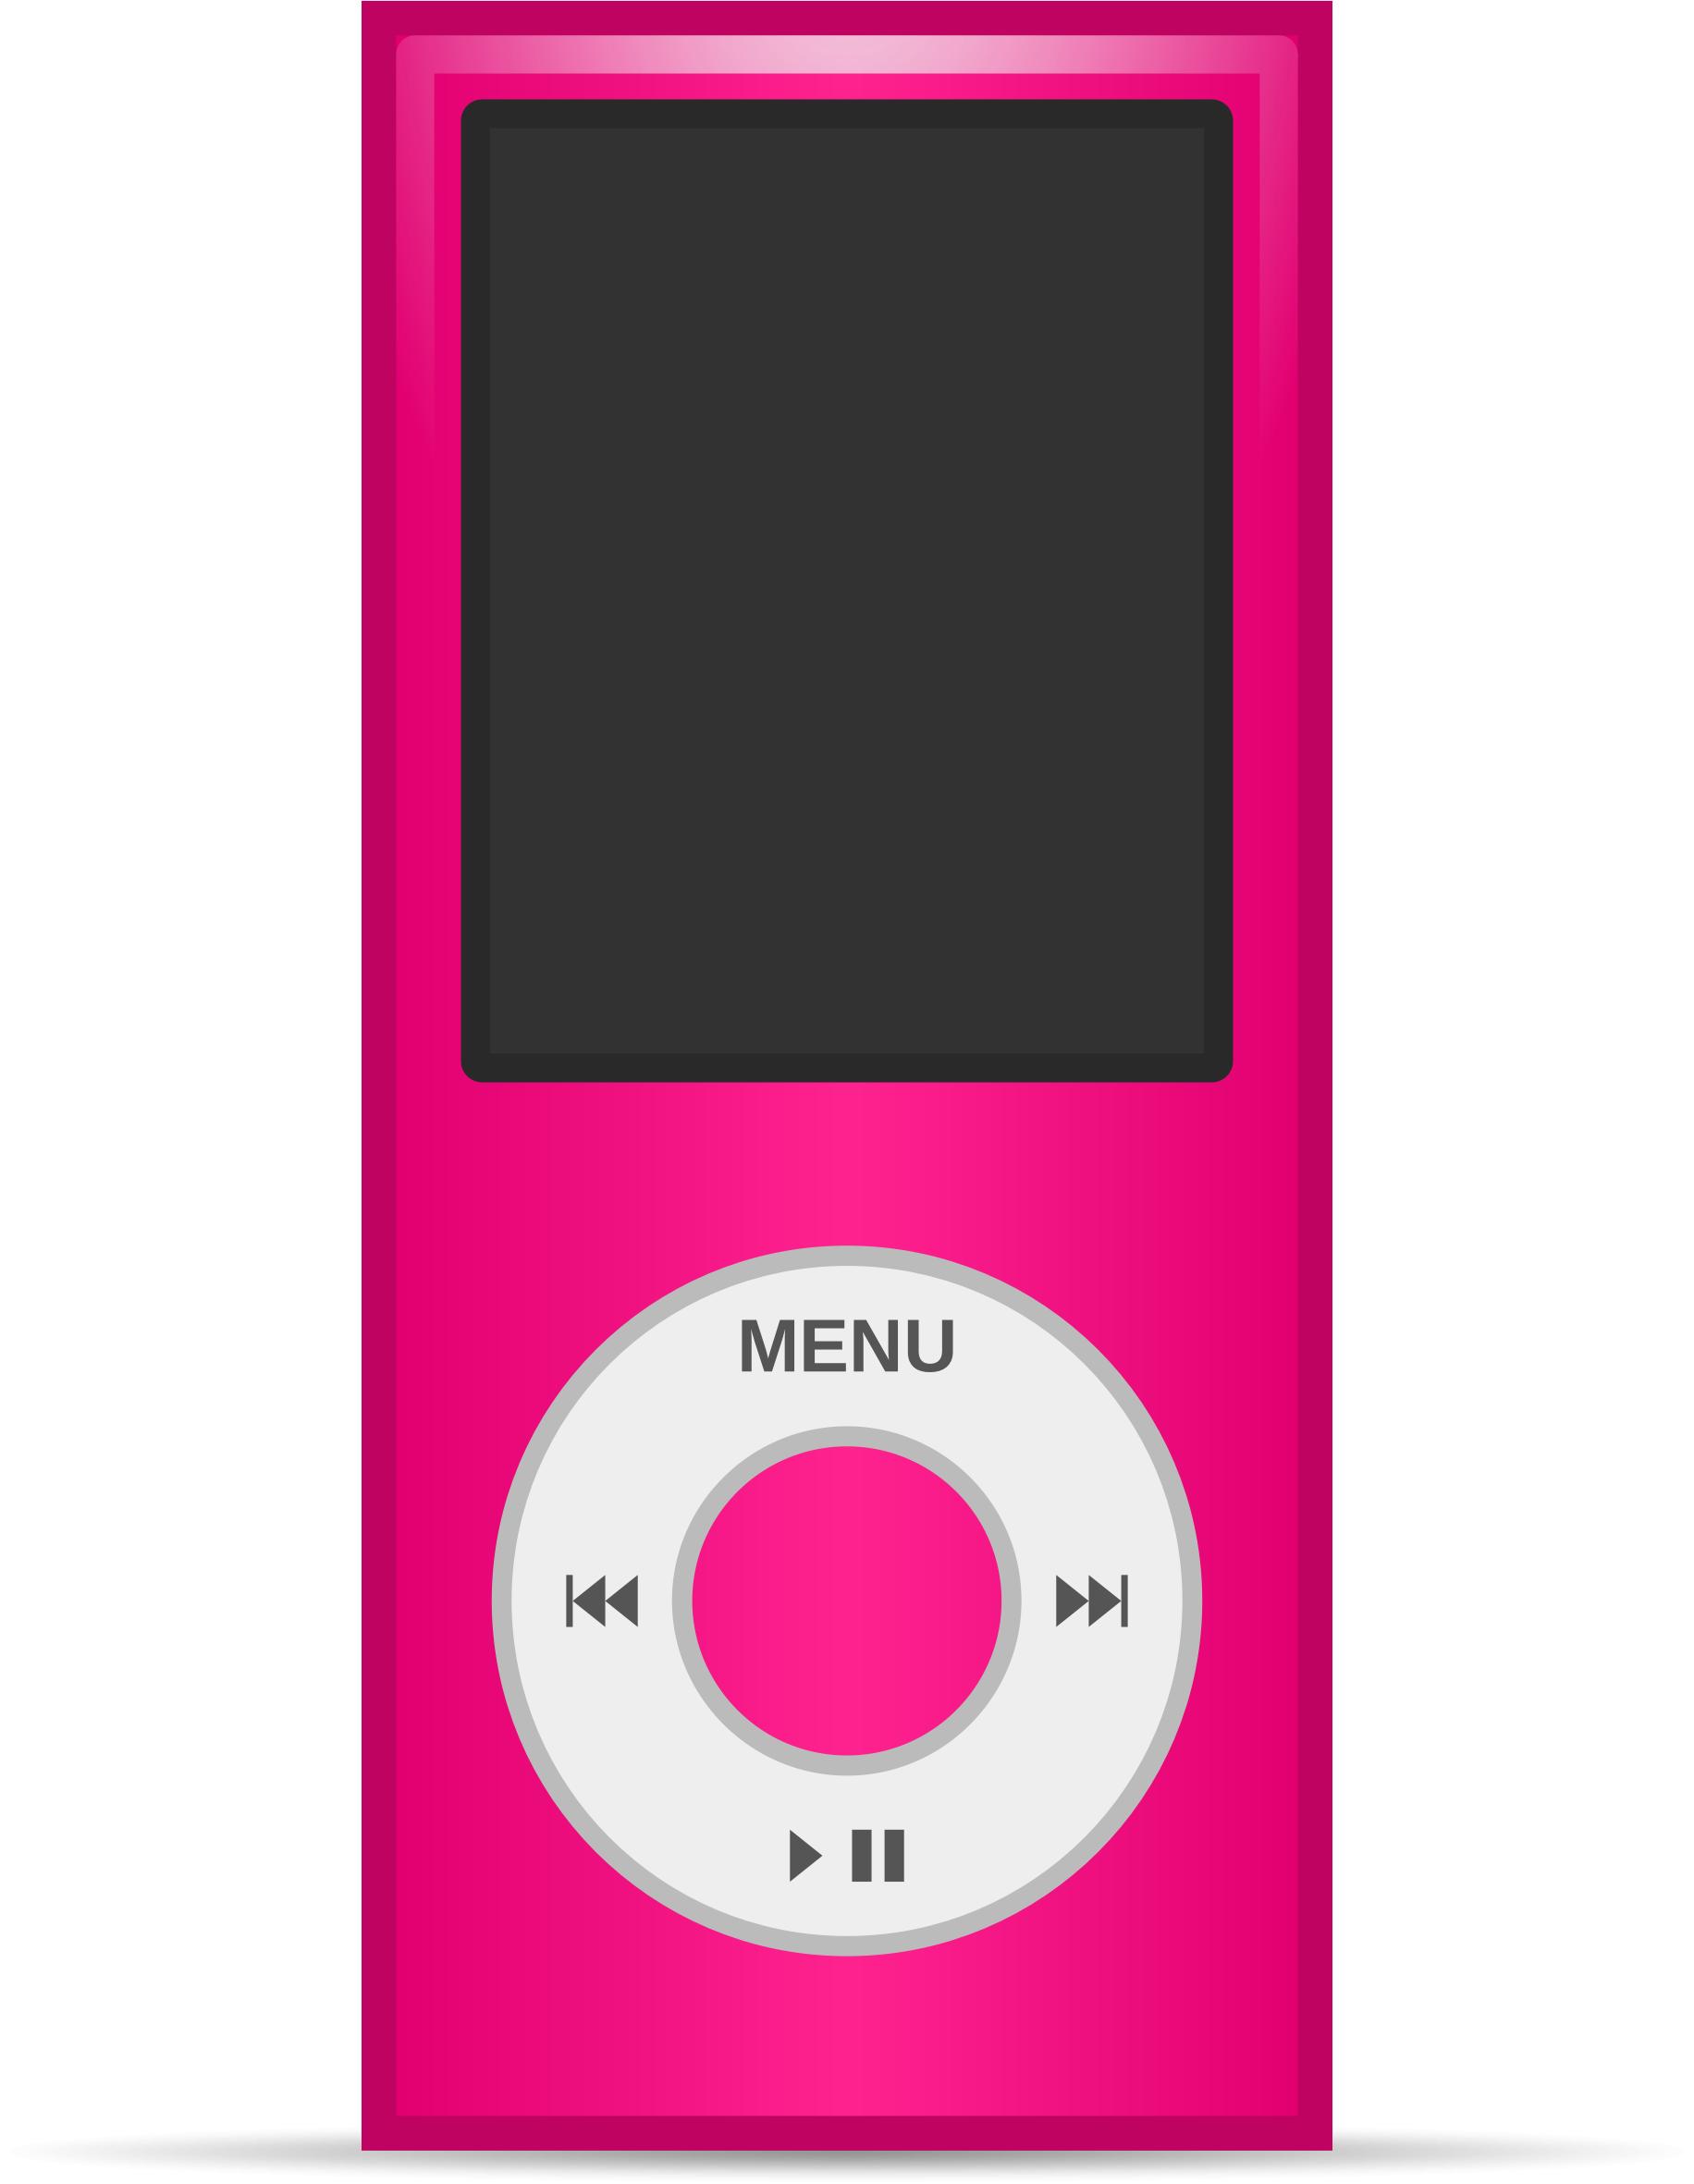 Multimedia player iPod png